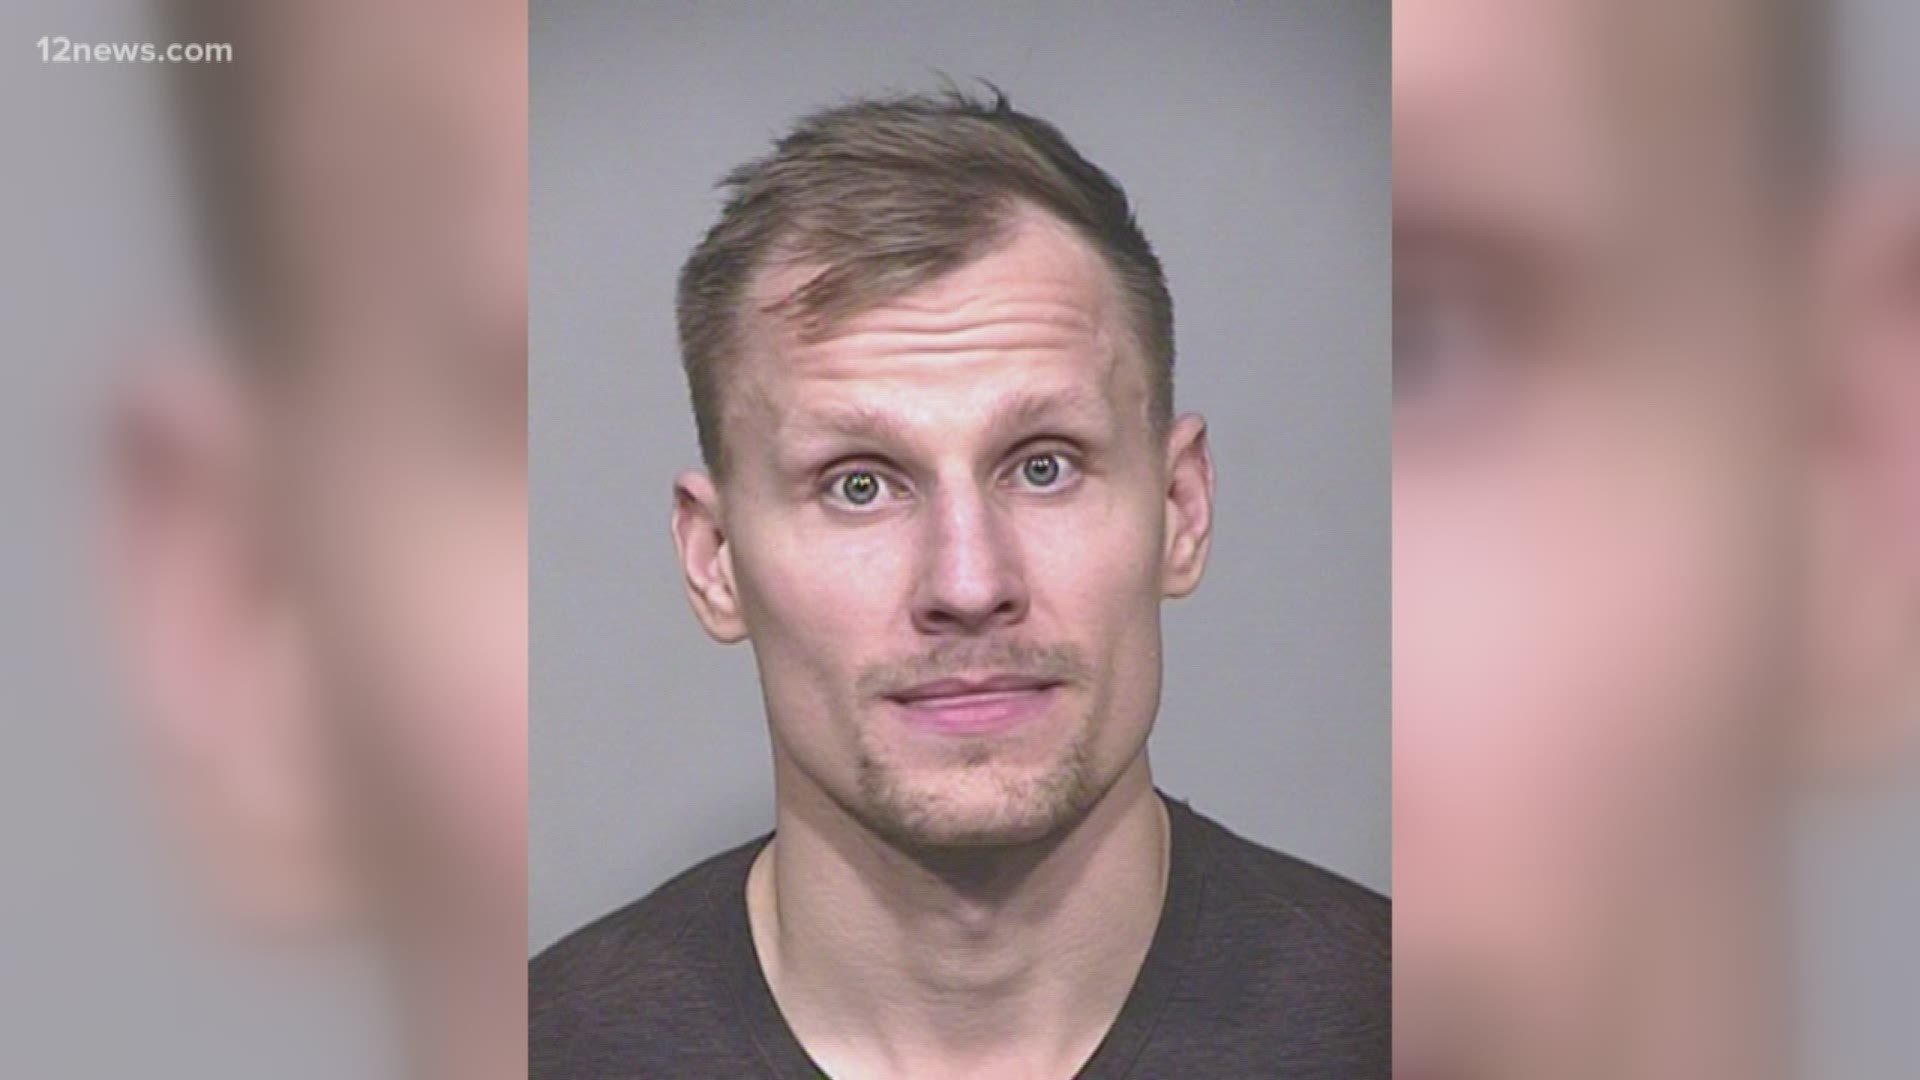 Coyotes RW Richard Panik refused to leave the entrance of Bevvy in Old Town April 8, the Scottsdale Police Department said. Officers arrested him for trespassing around 8:50 p.m.